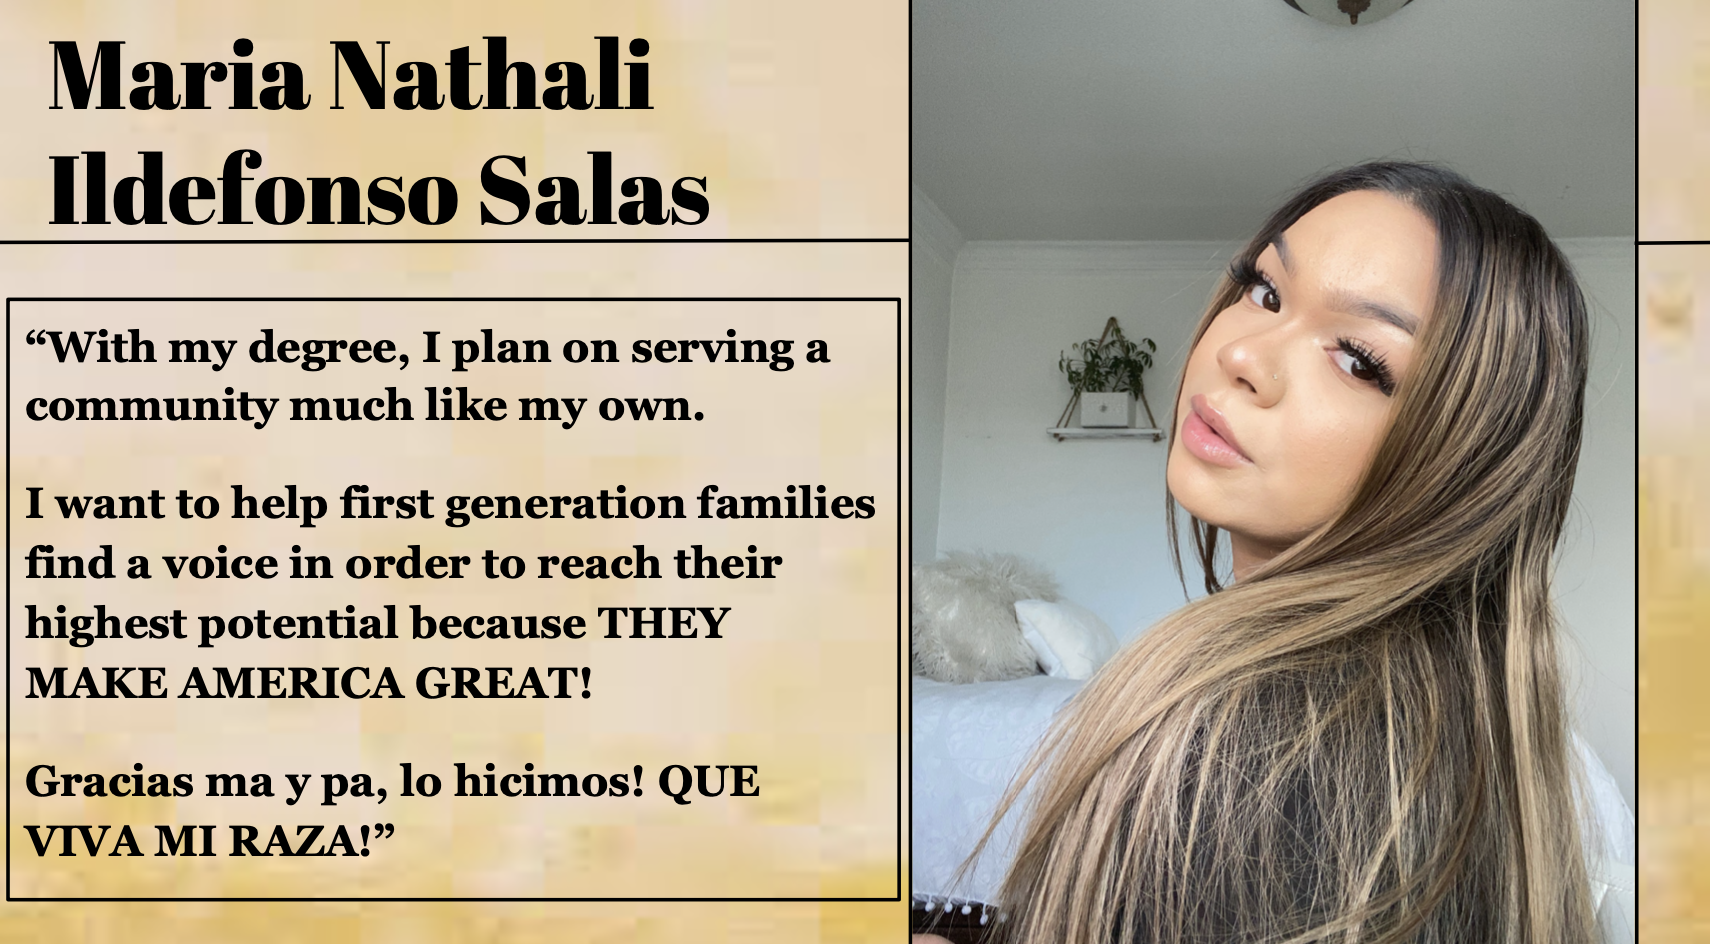 Maria Nathali Ildefonso Salas plans on serving a community much like my own.